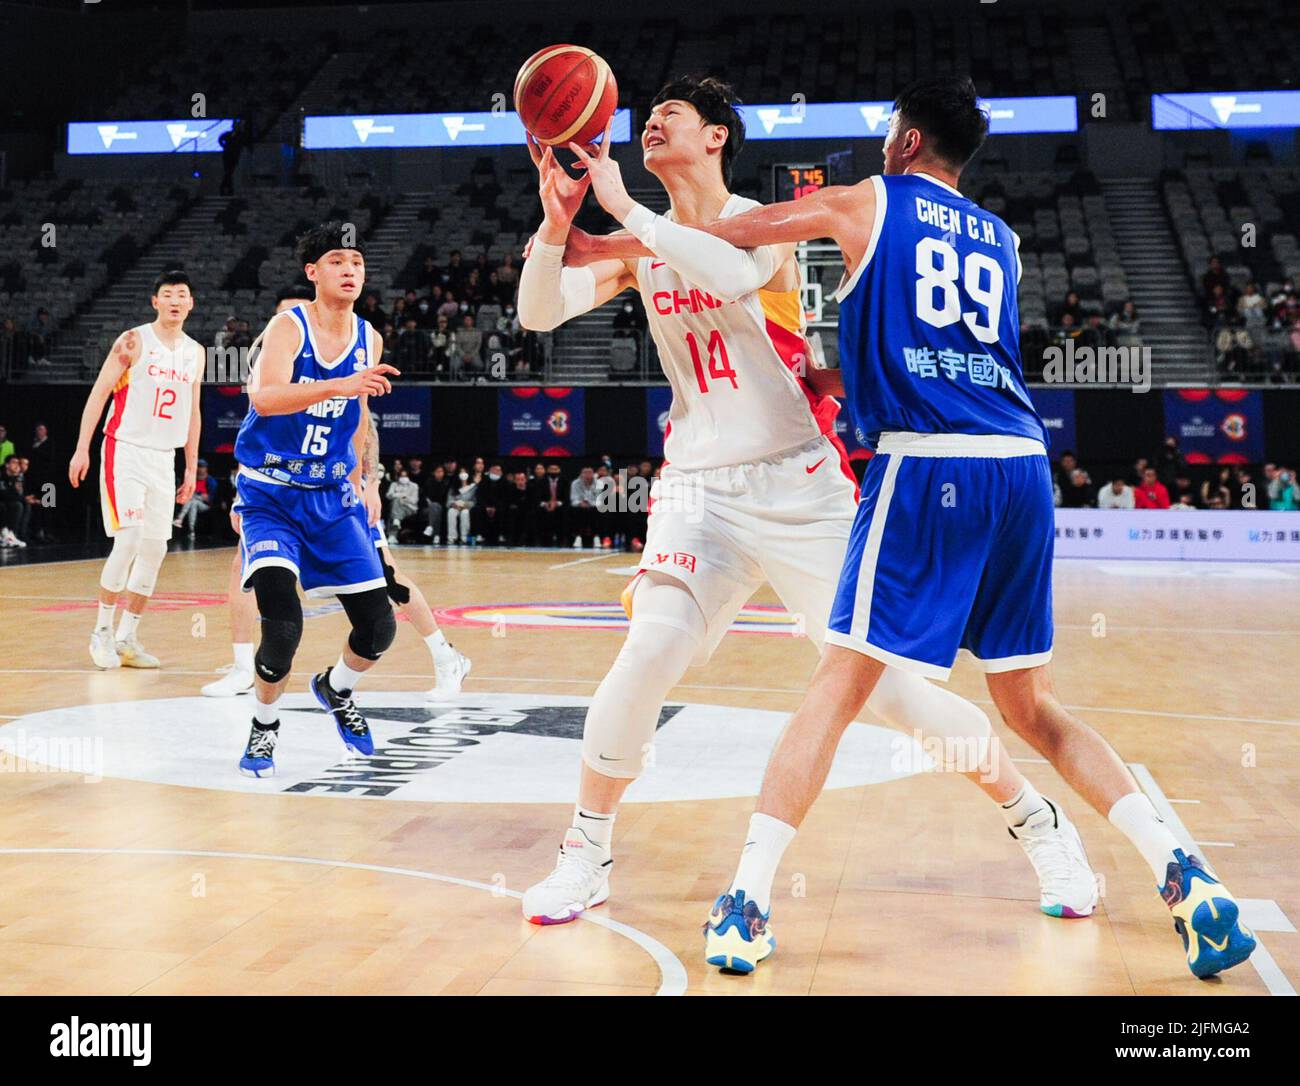 Melbourne, Australia. 4th July, 2022. Wang Zhelin (2nd R) of China vies with Chen Chao Hao (1st R) of Chinese Taipei during a Group B match between China and Chinese Taipei of the FIBA World Cup Asian qualifiers in Melbourne, Australia, July 4, 2022. Credit: Bai Xue/Xinhua/Alamy Live News Stock Photo